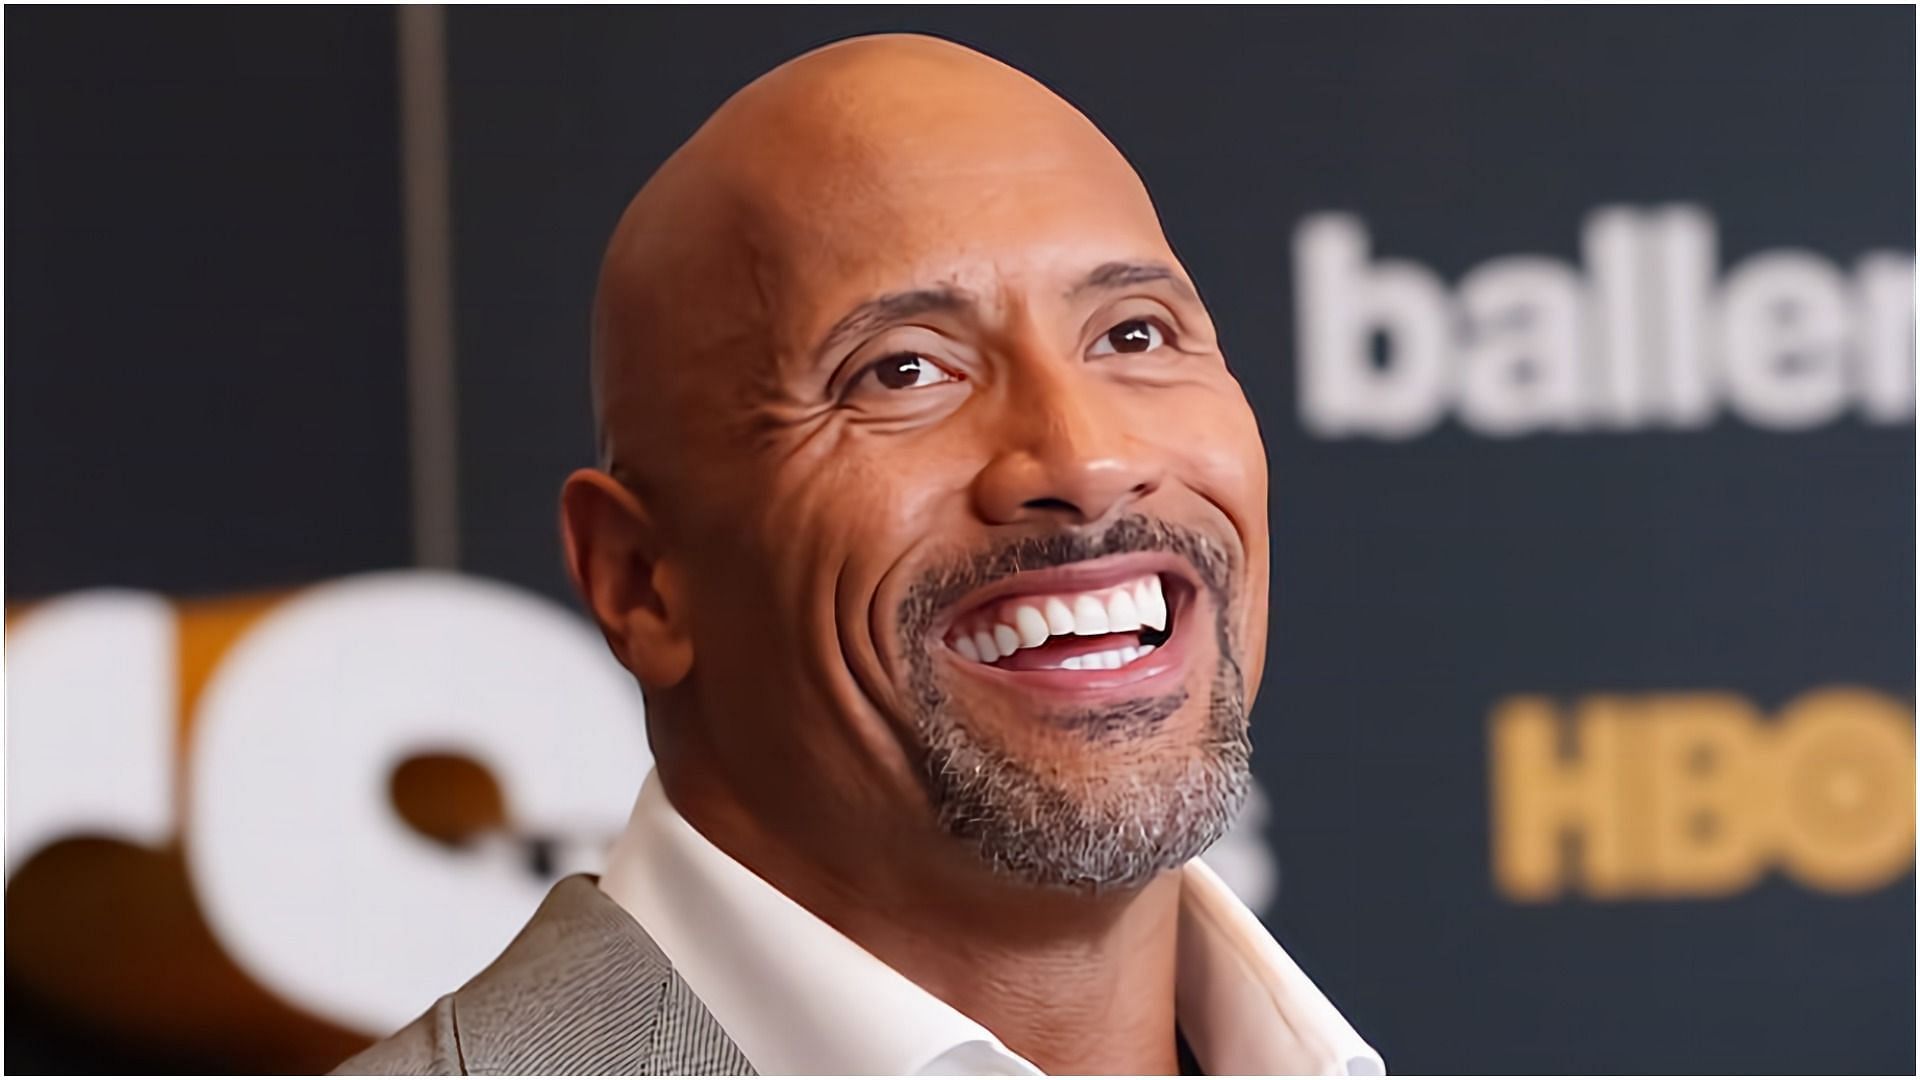 Dwayne Johnson loves buffalo and eggs in his breakfast (Image via Aaron Davidson/Getty Images)